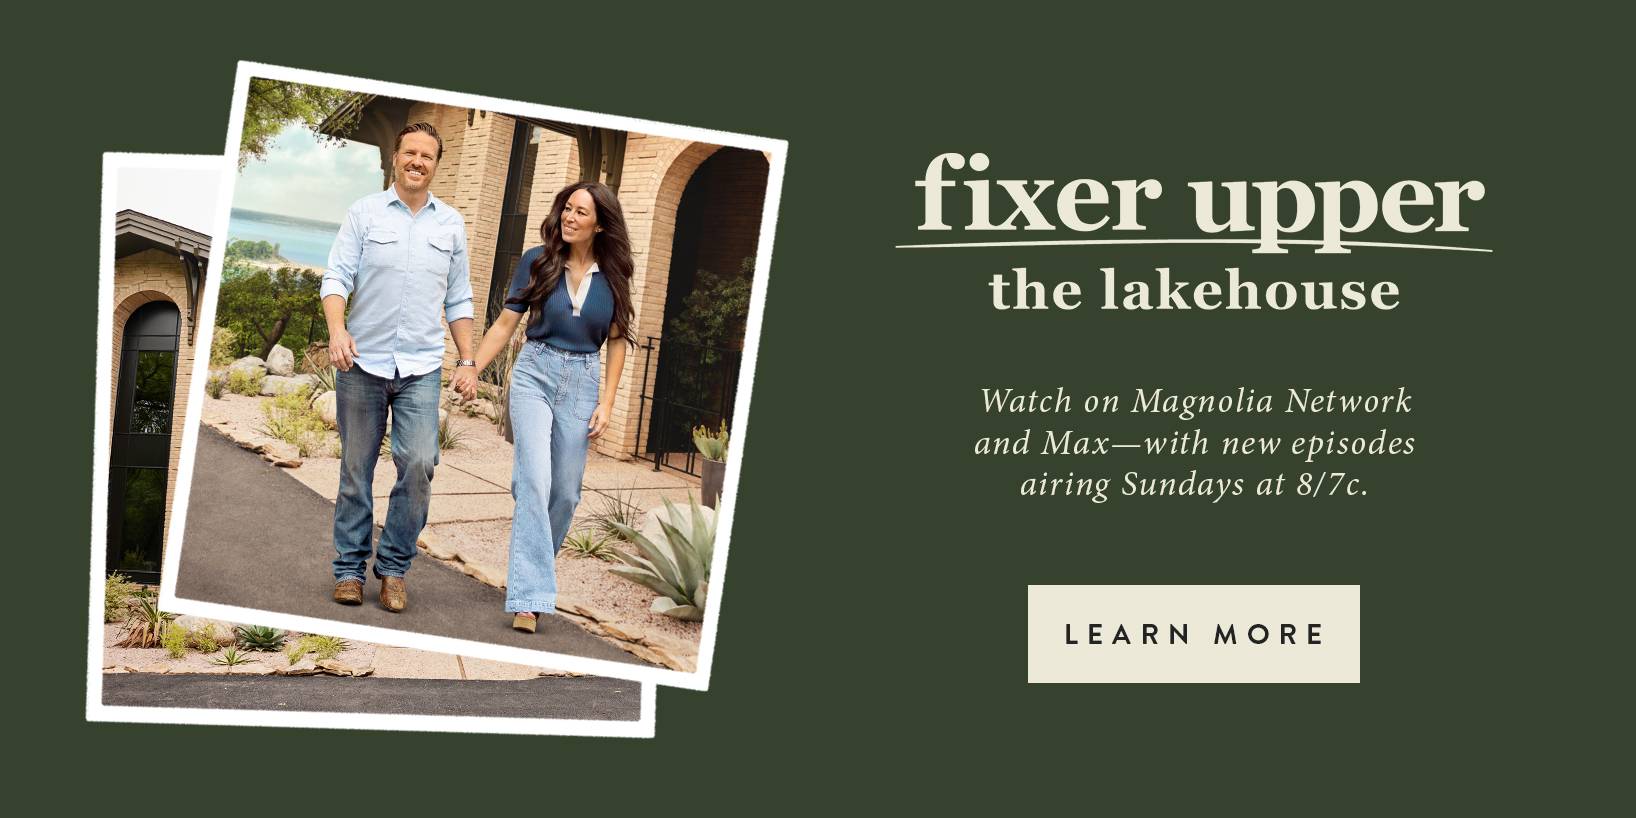 Fixer Upper the Lakehouse.  Watch on Magnolia Network and Max - with new episodes airing Sundays at 8/7c.  Learn more.